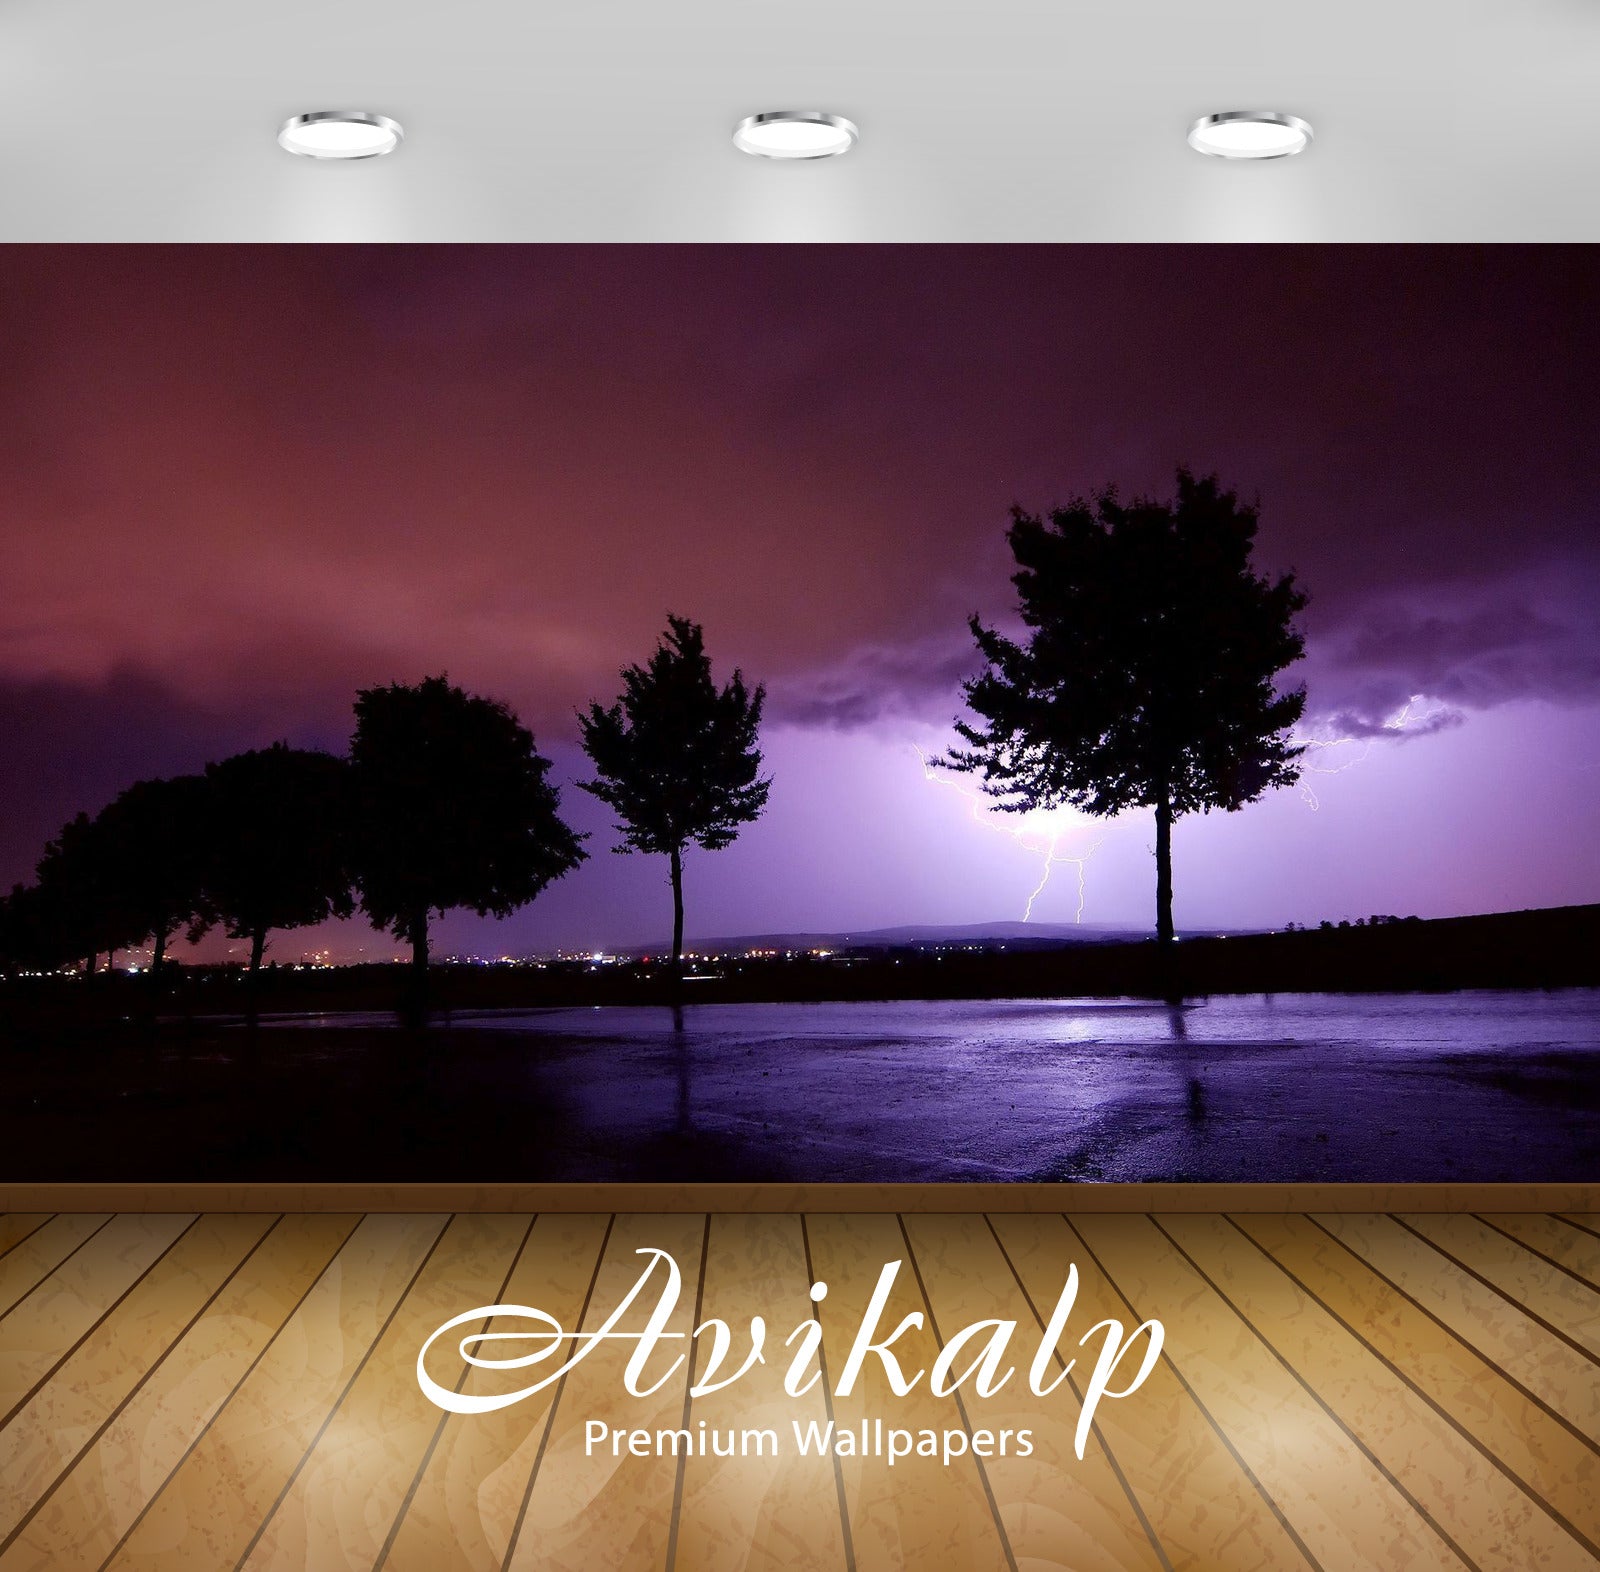 Avikalp Exclusive Awi6368 Storm At Sunset Nature Full HD Wallpapers for Living room, Hall, Kids Room